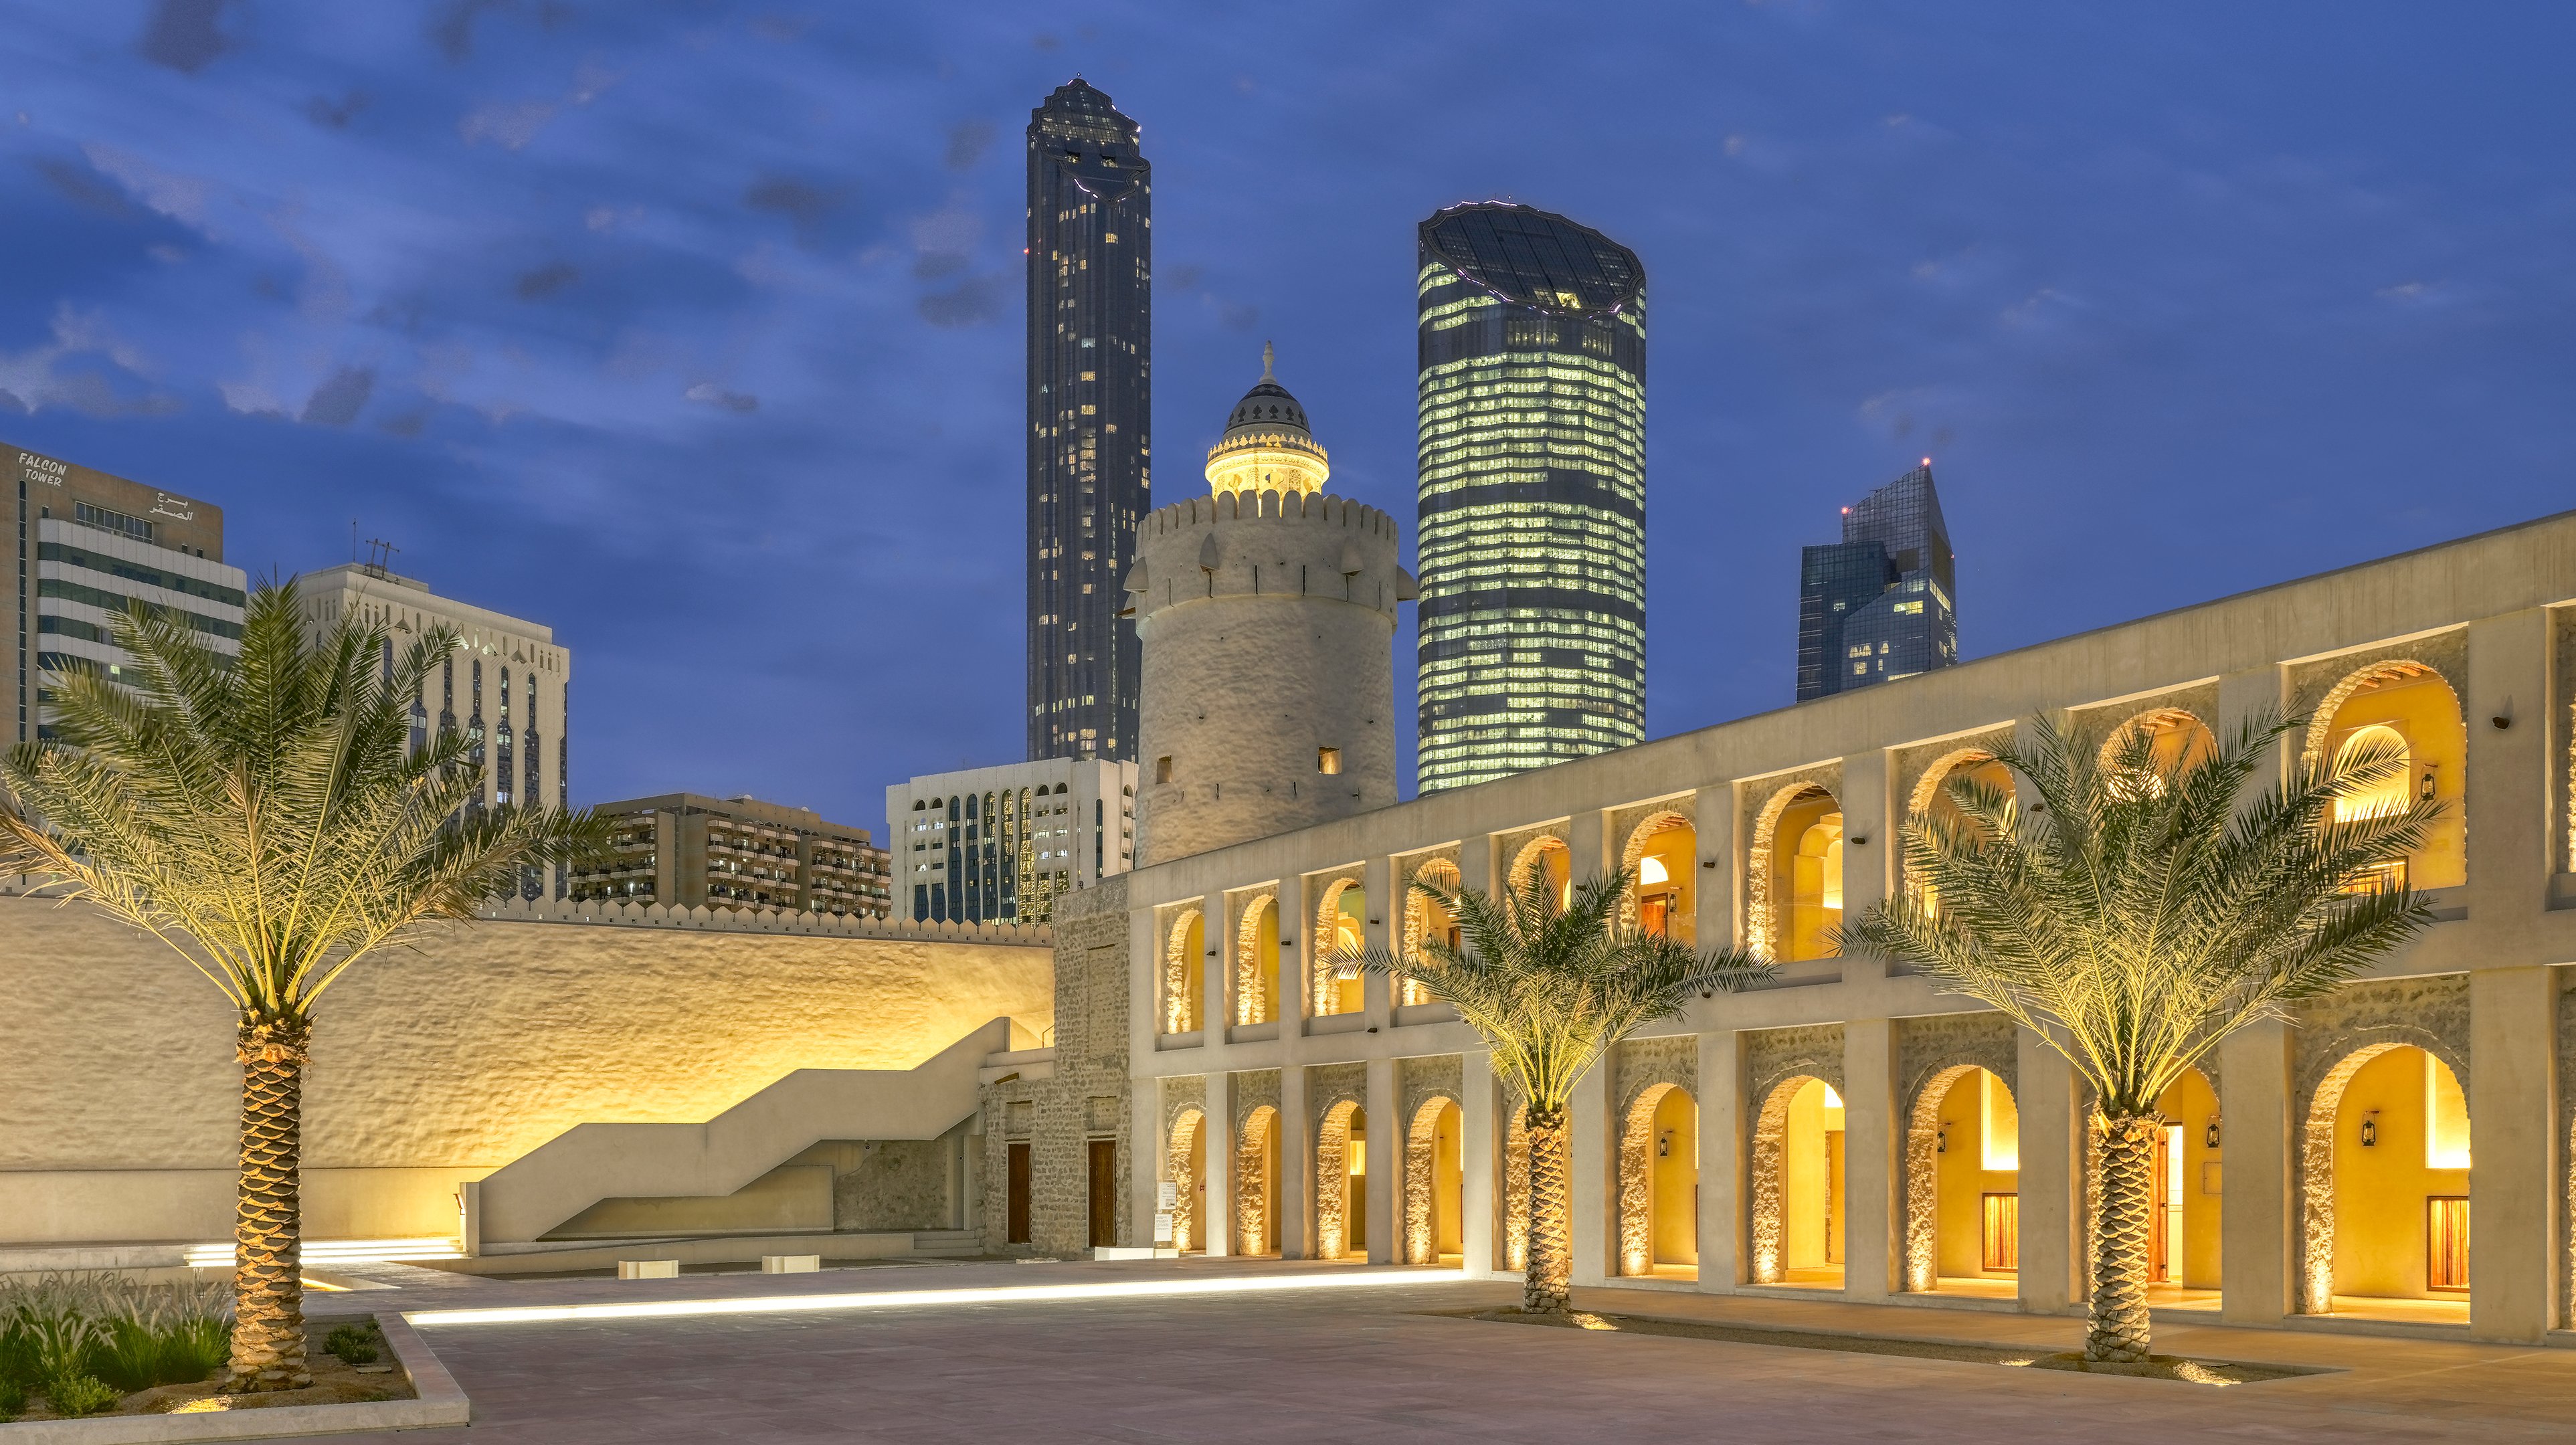 Historical buildings lit at night showing culture and history of Abu Dhabi